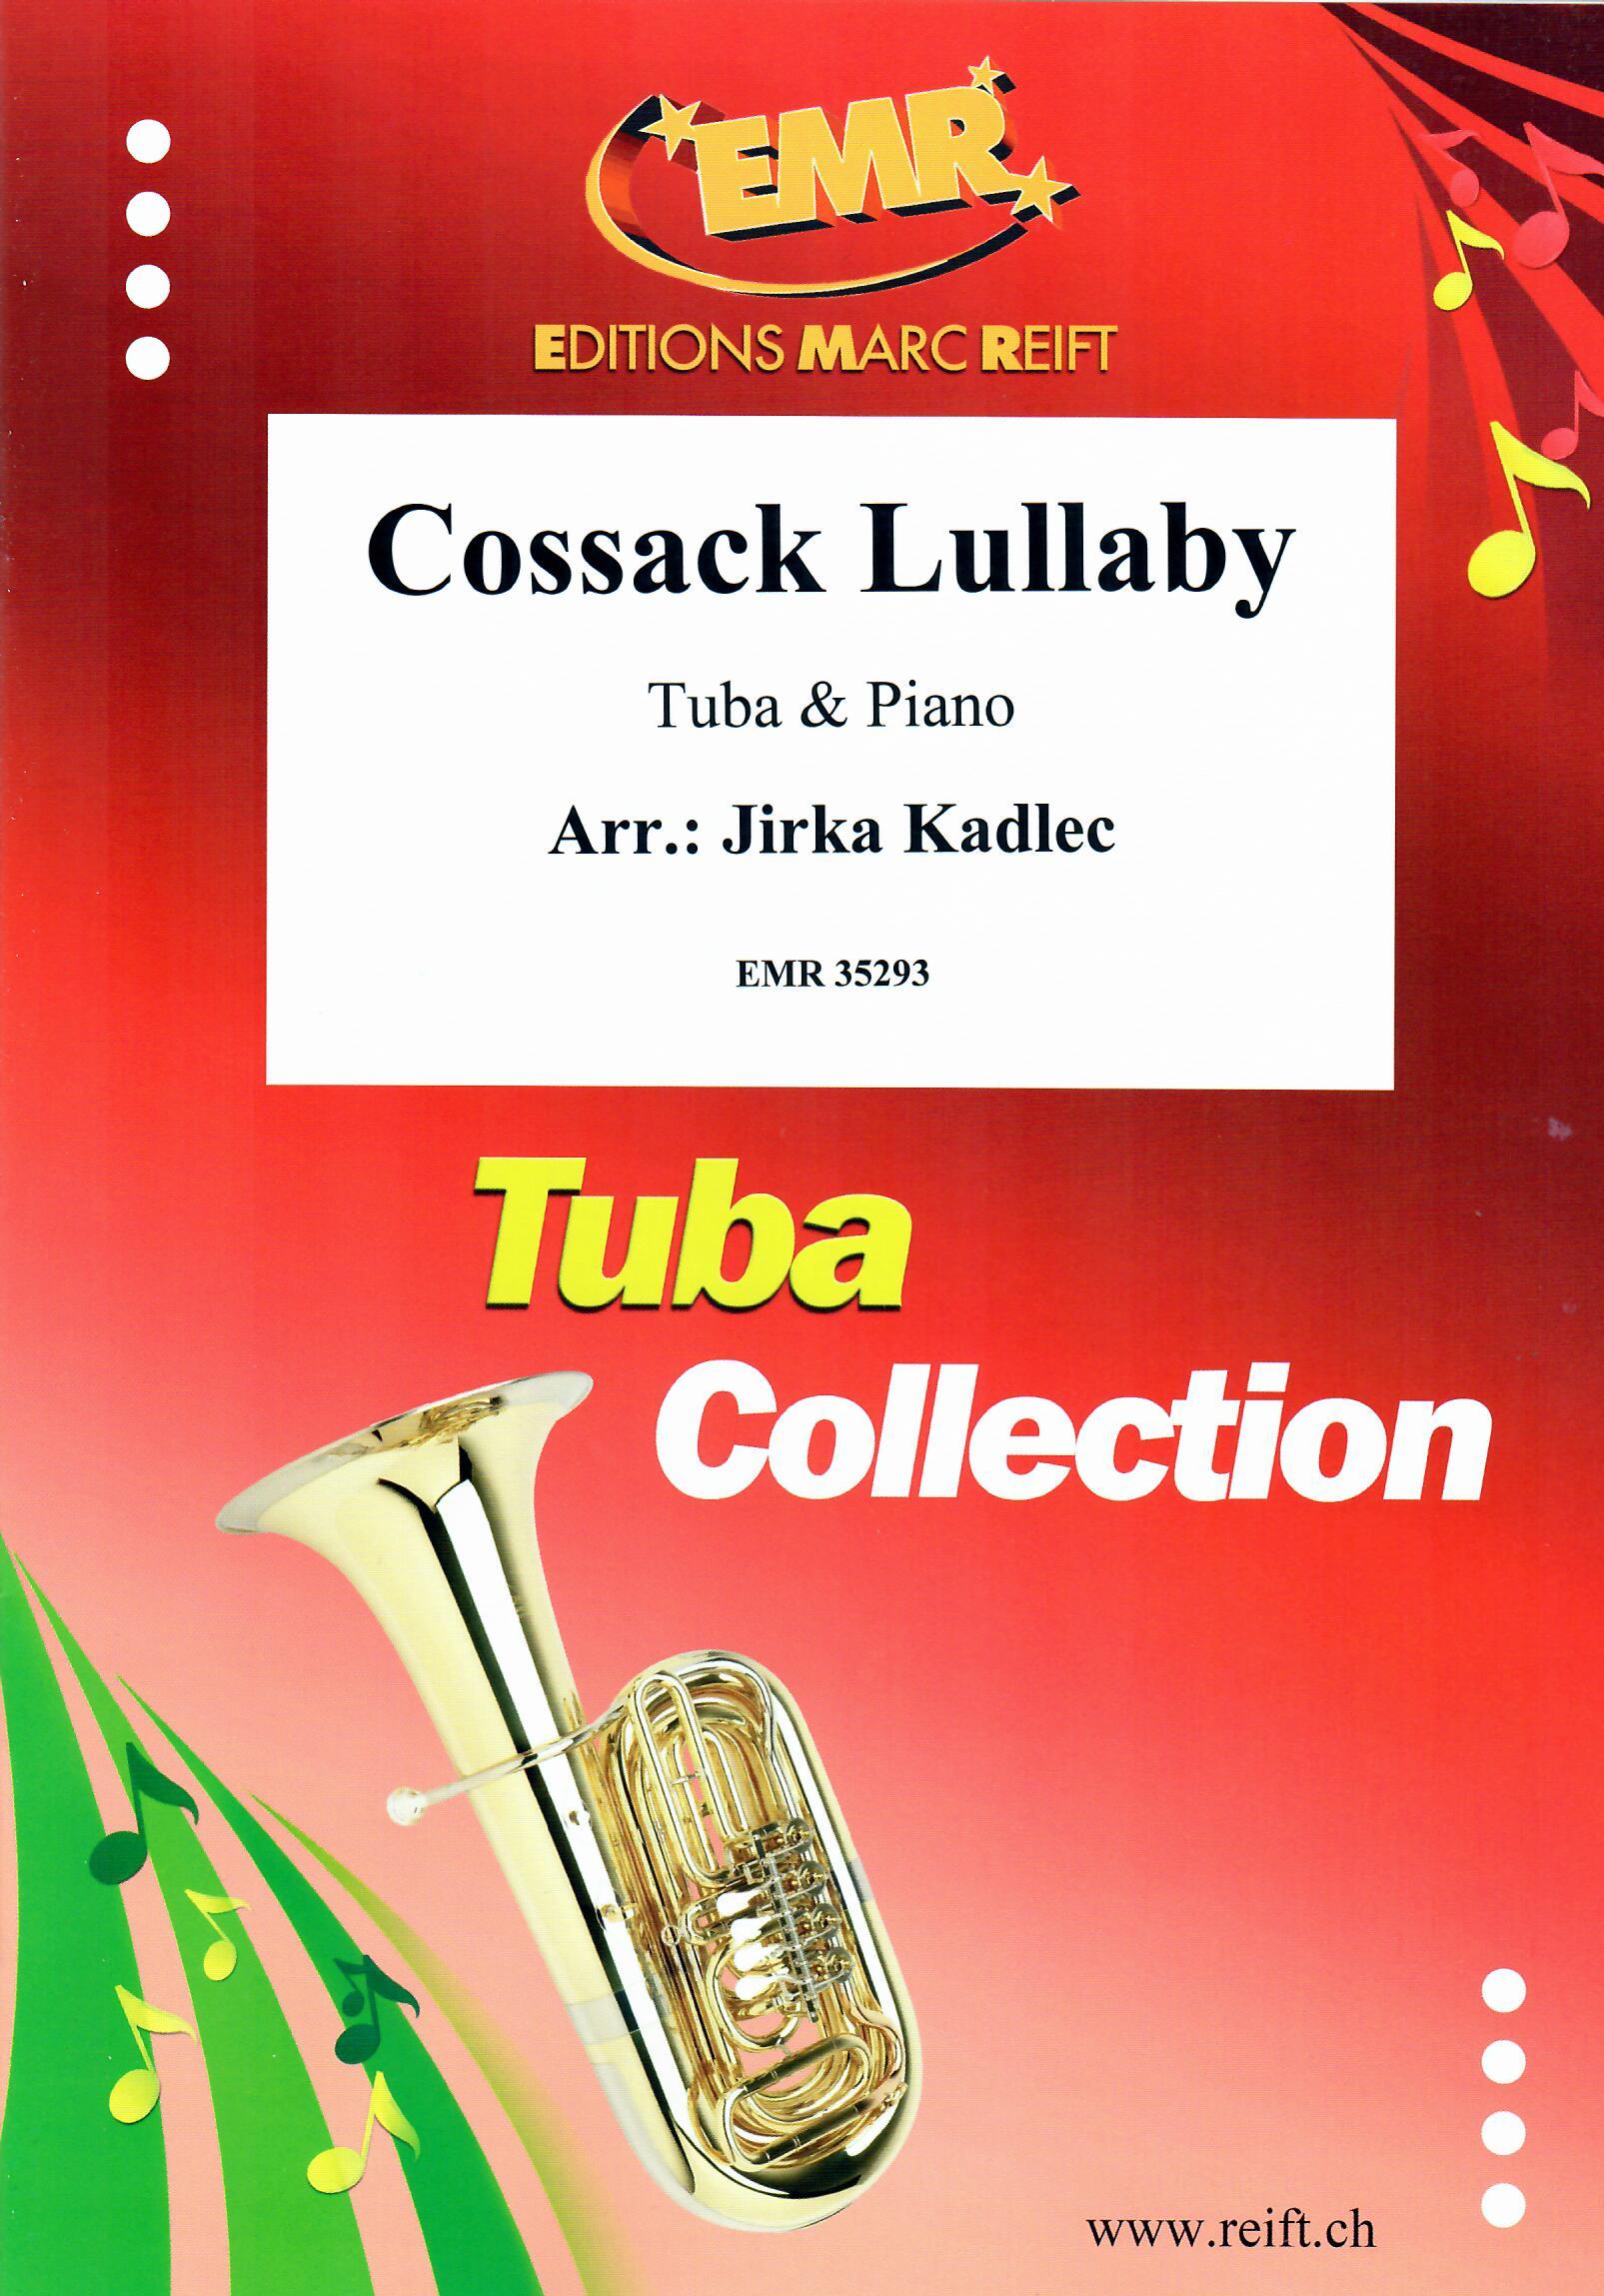 COSSACK LULLABY, SOLOS - E♭. Bass